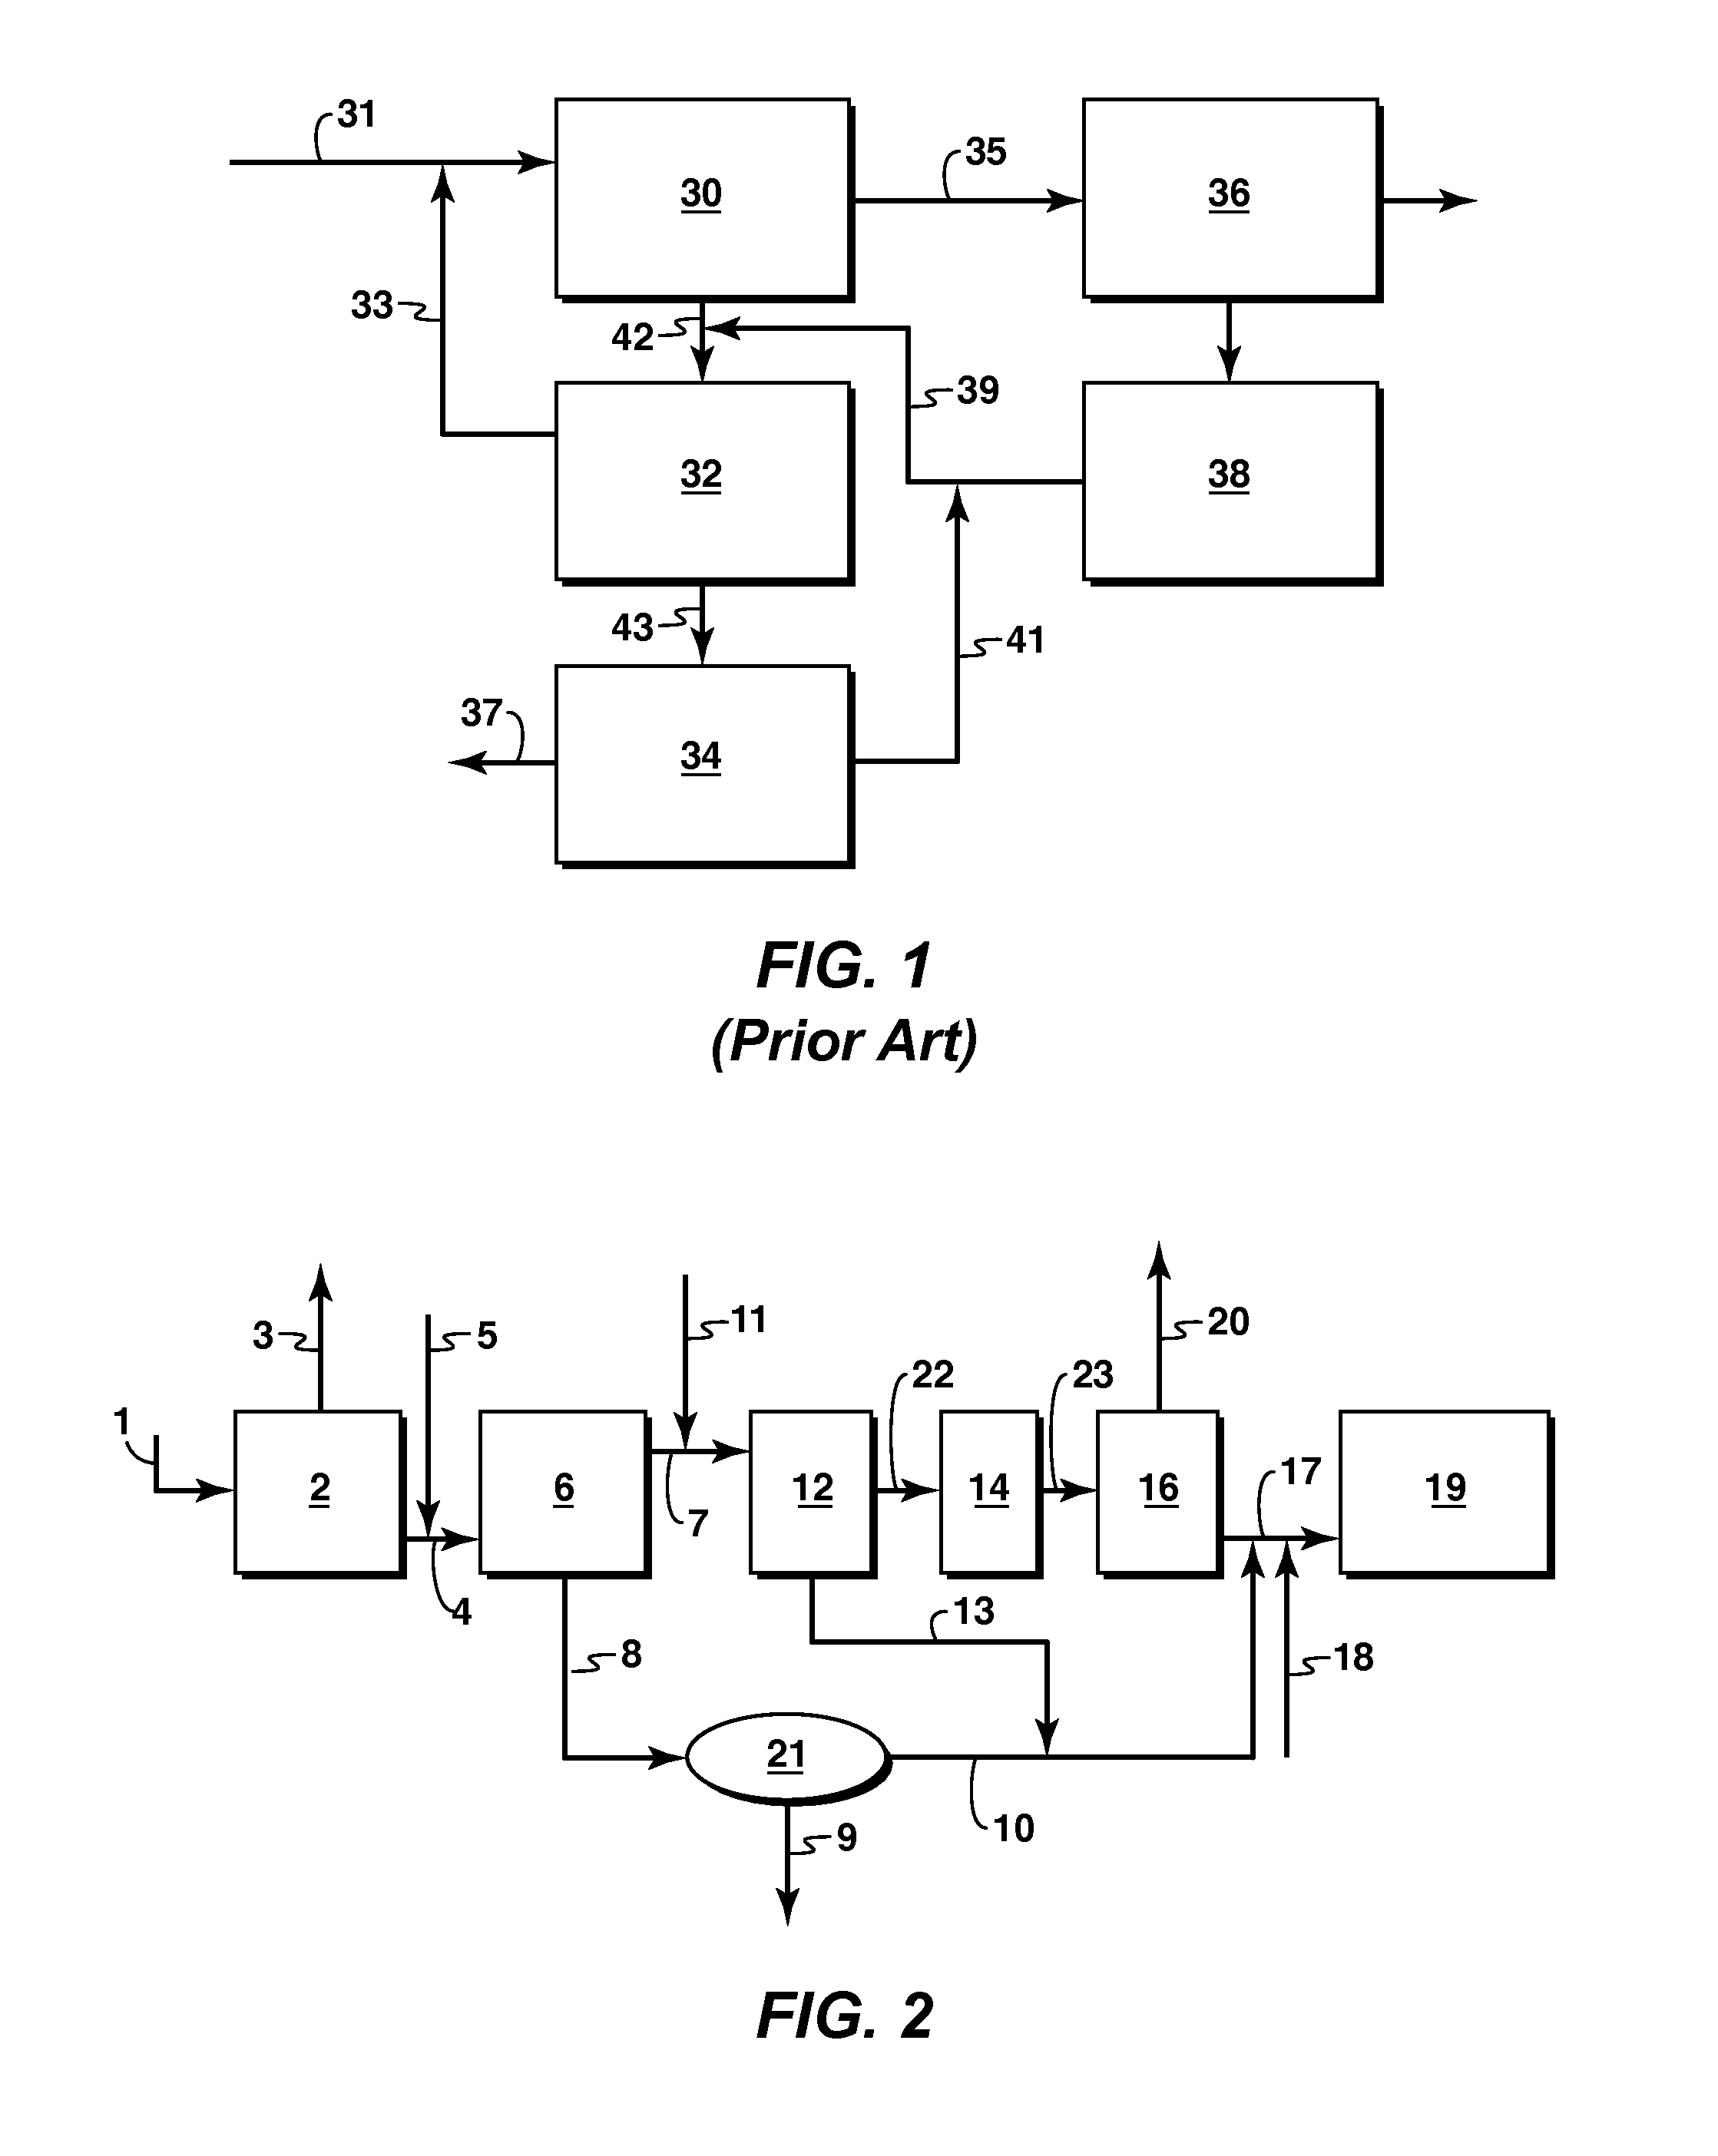 Method and system for reclaiming waste hydrocarbon from tailings using solvent sequencing